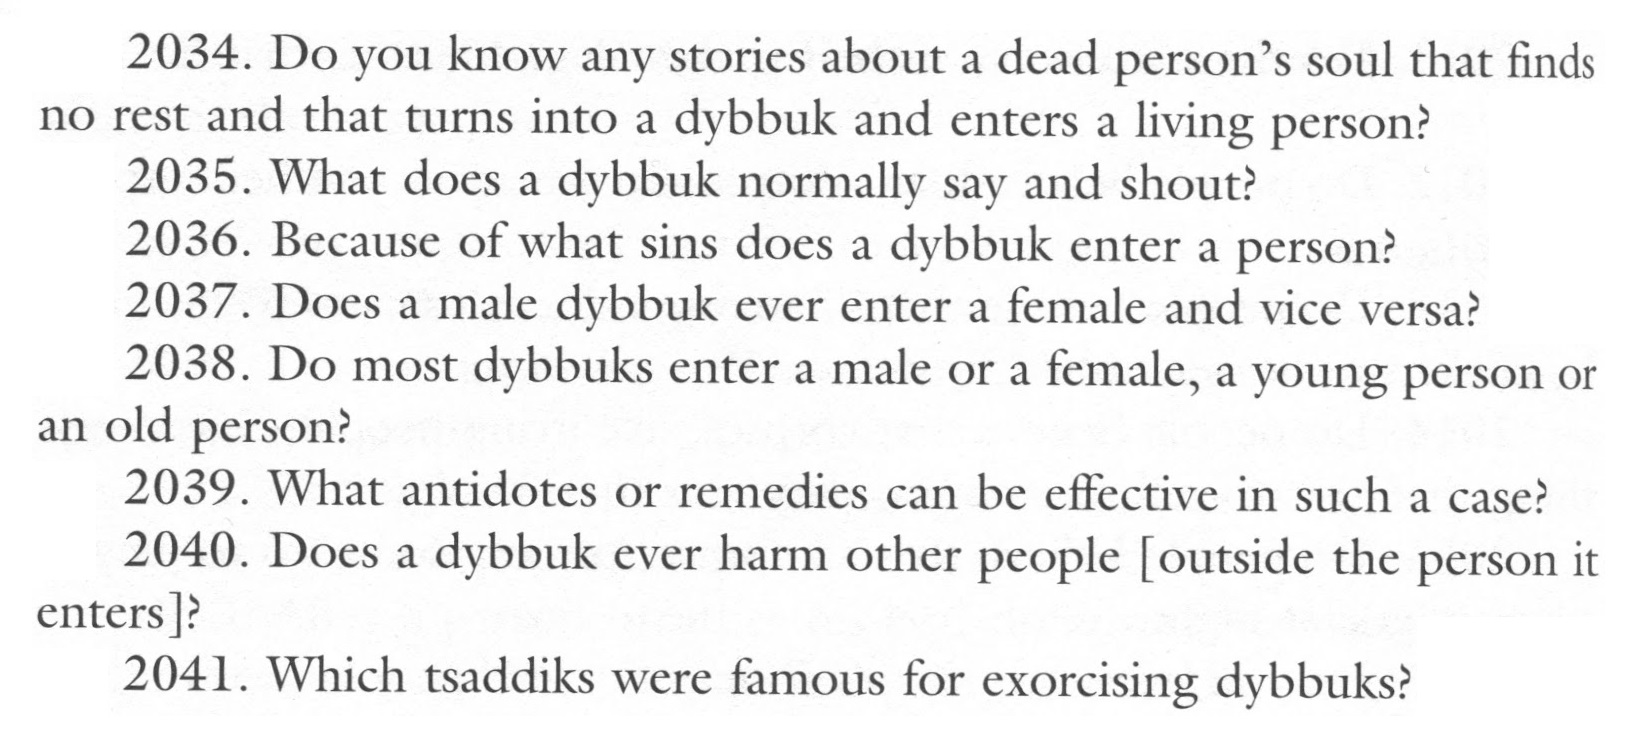 Dybbuk-related questions from the Ansky Jewish Ethnographic Program